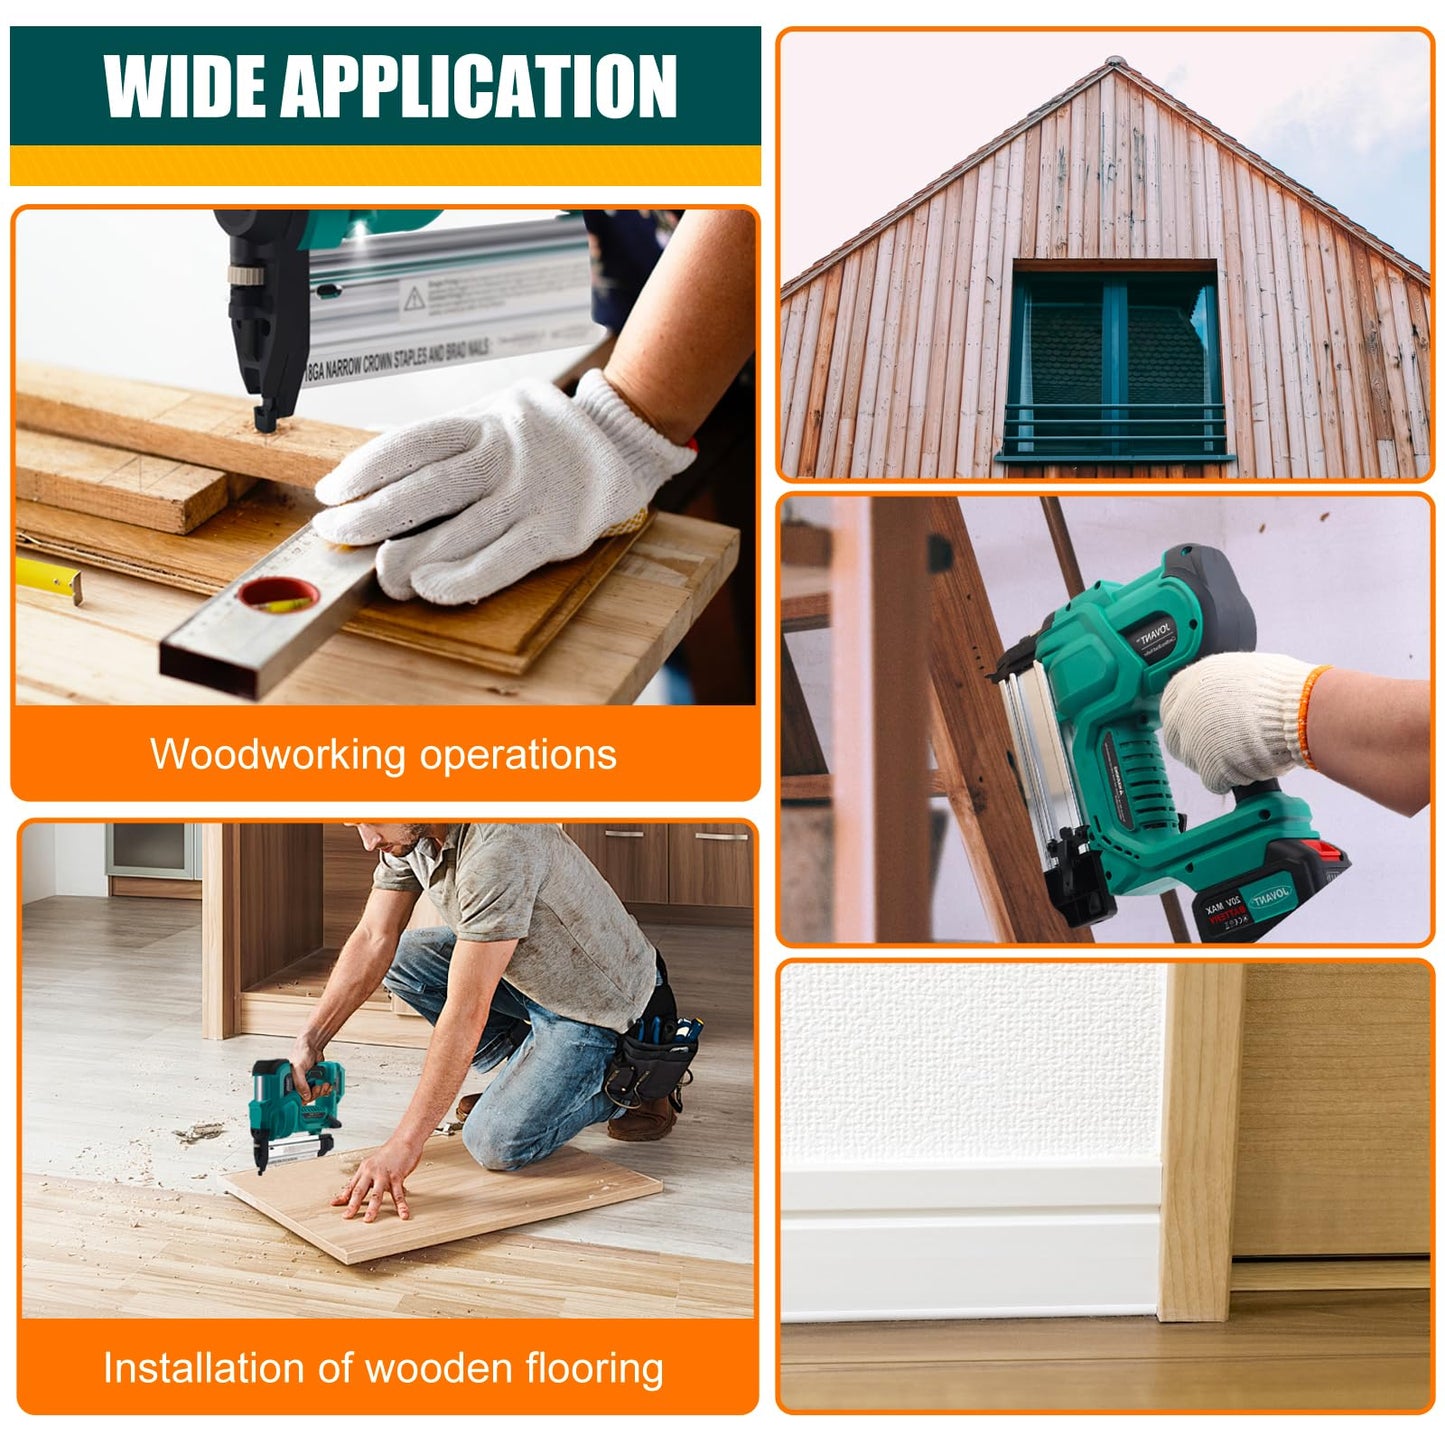 WIDE APPLICATION Woodworking operations Installation of wooden flooring